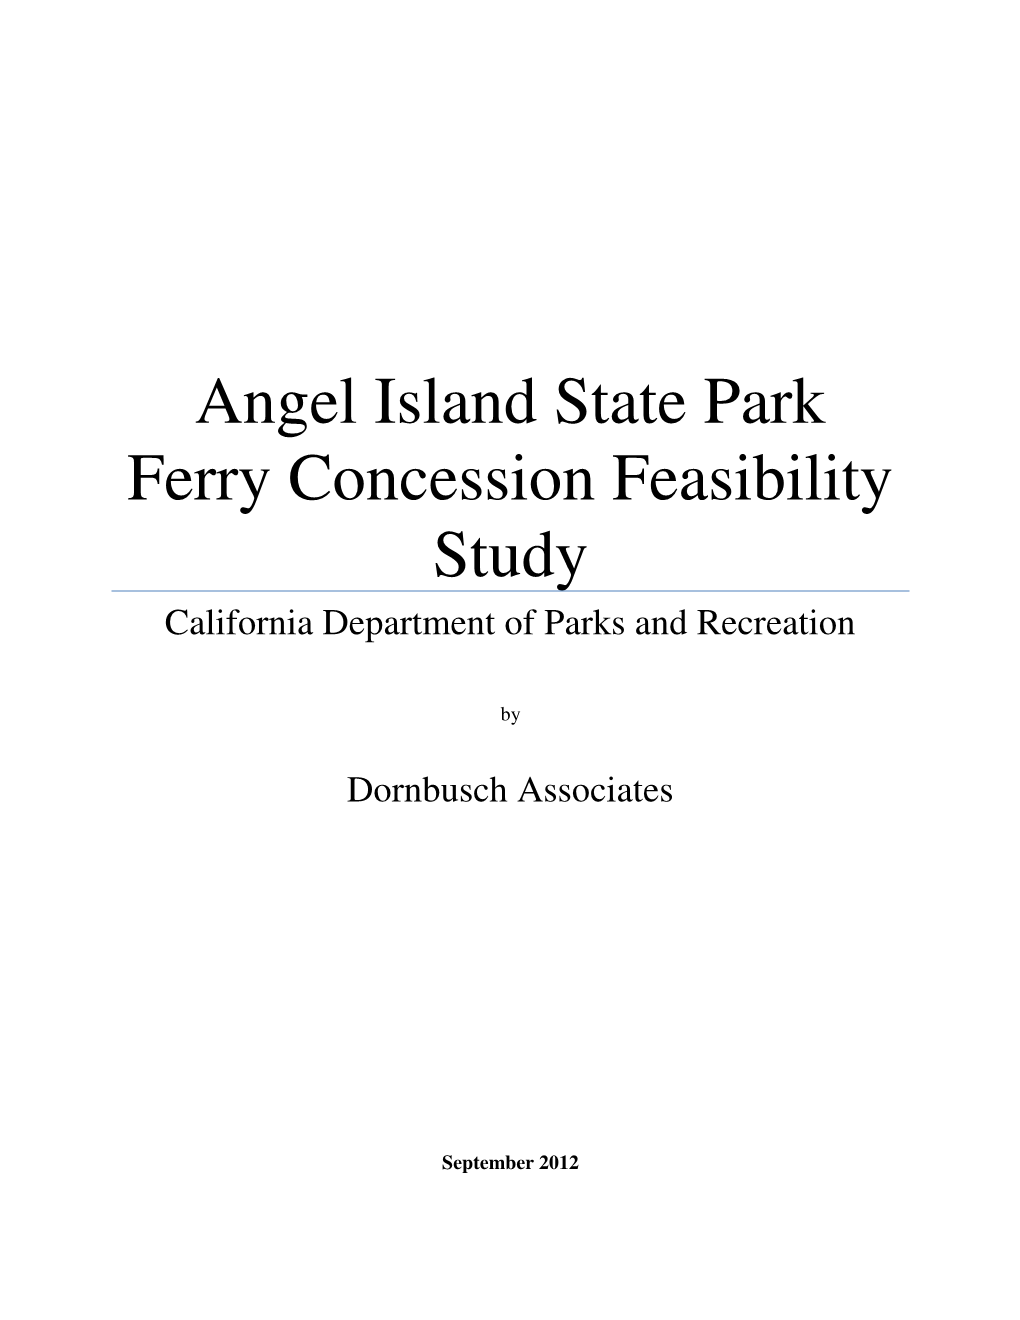 Angel Island State Park Ferry Concession Feasibility Study California Department of Parks and Recreation